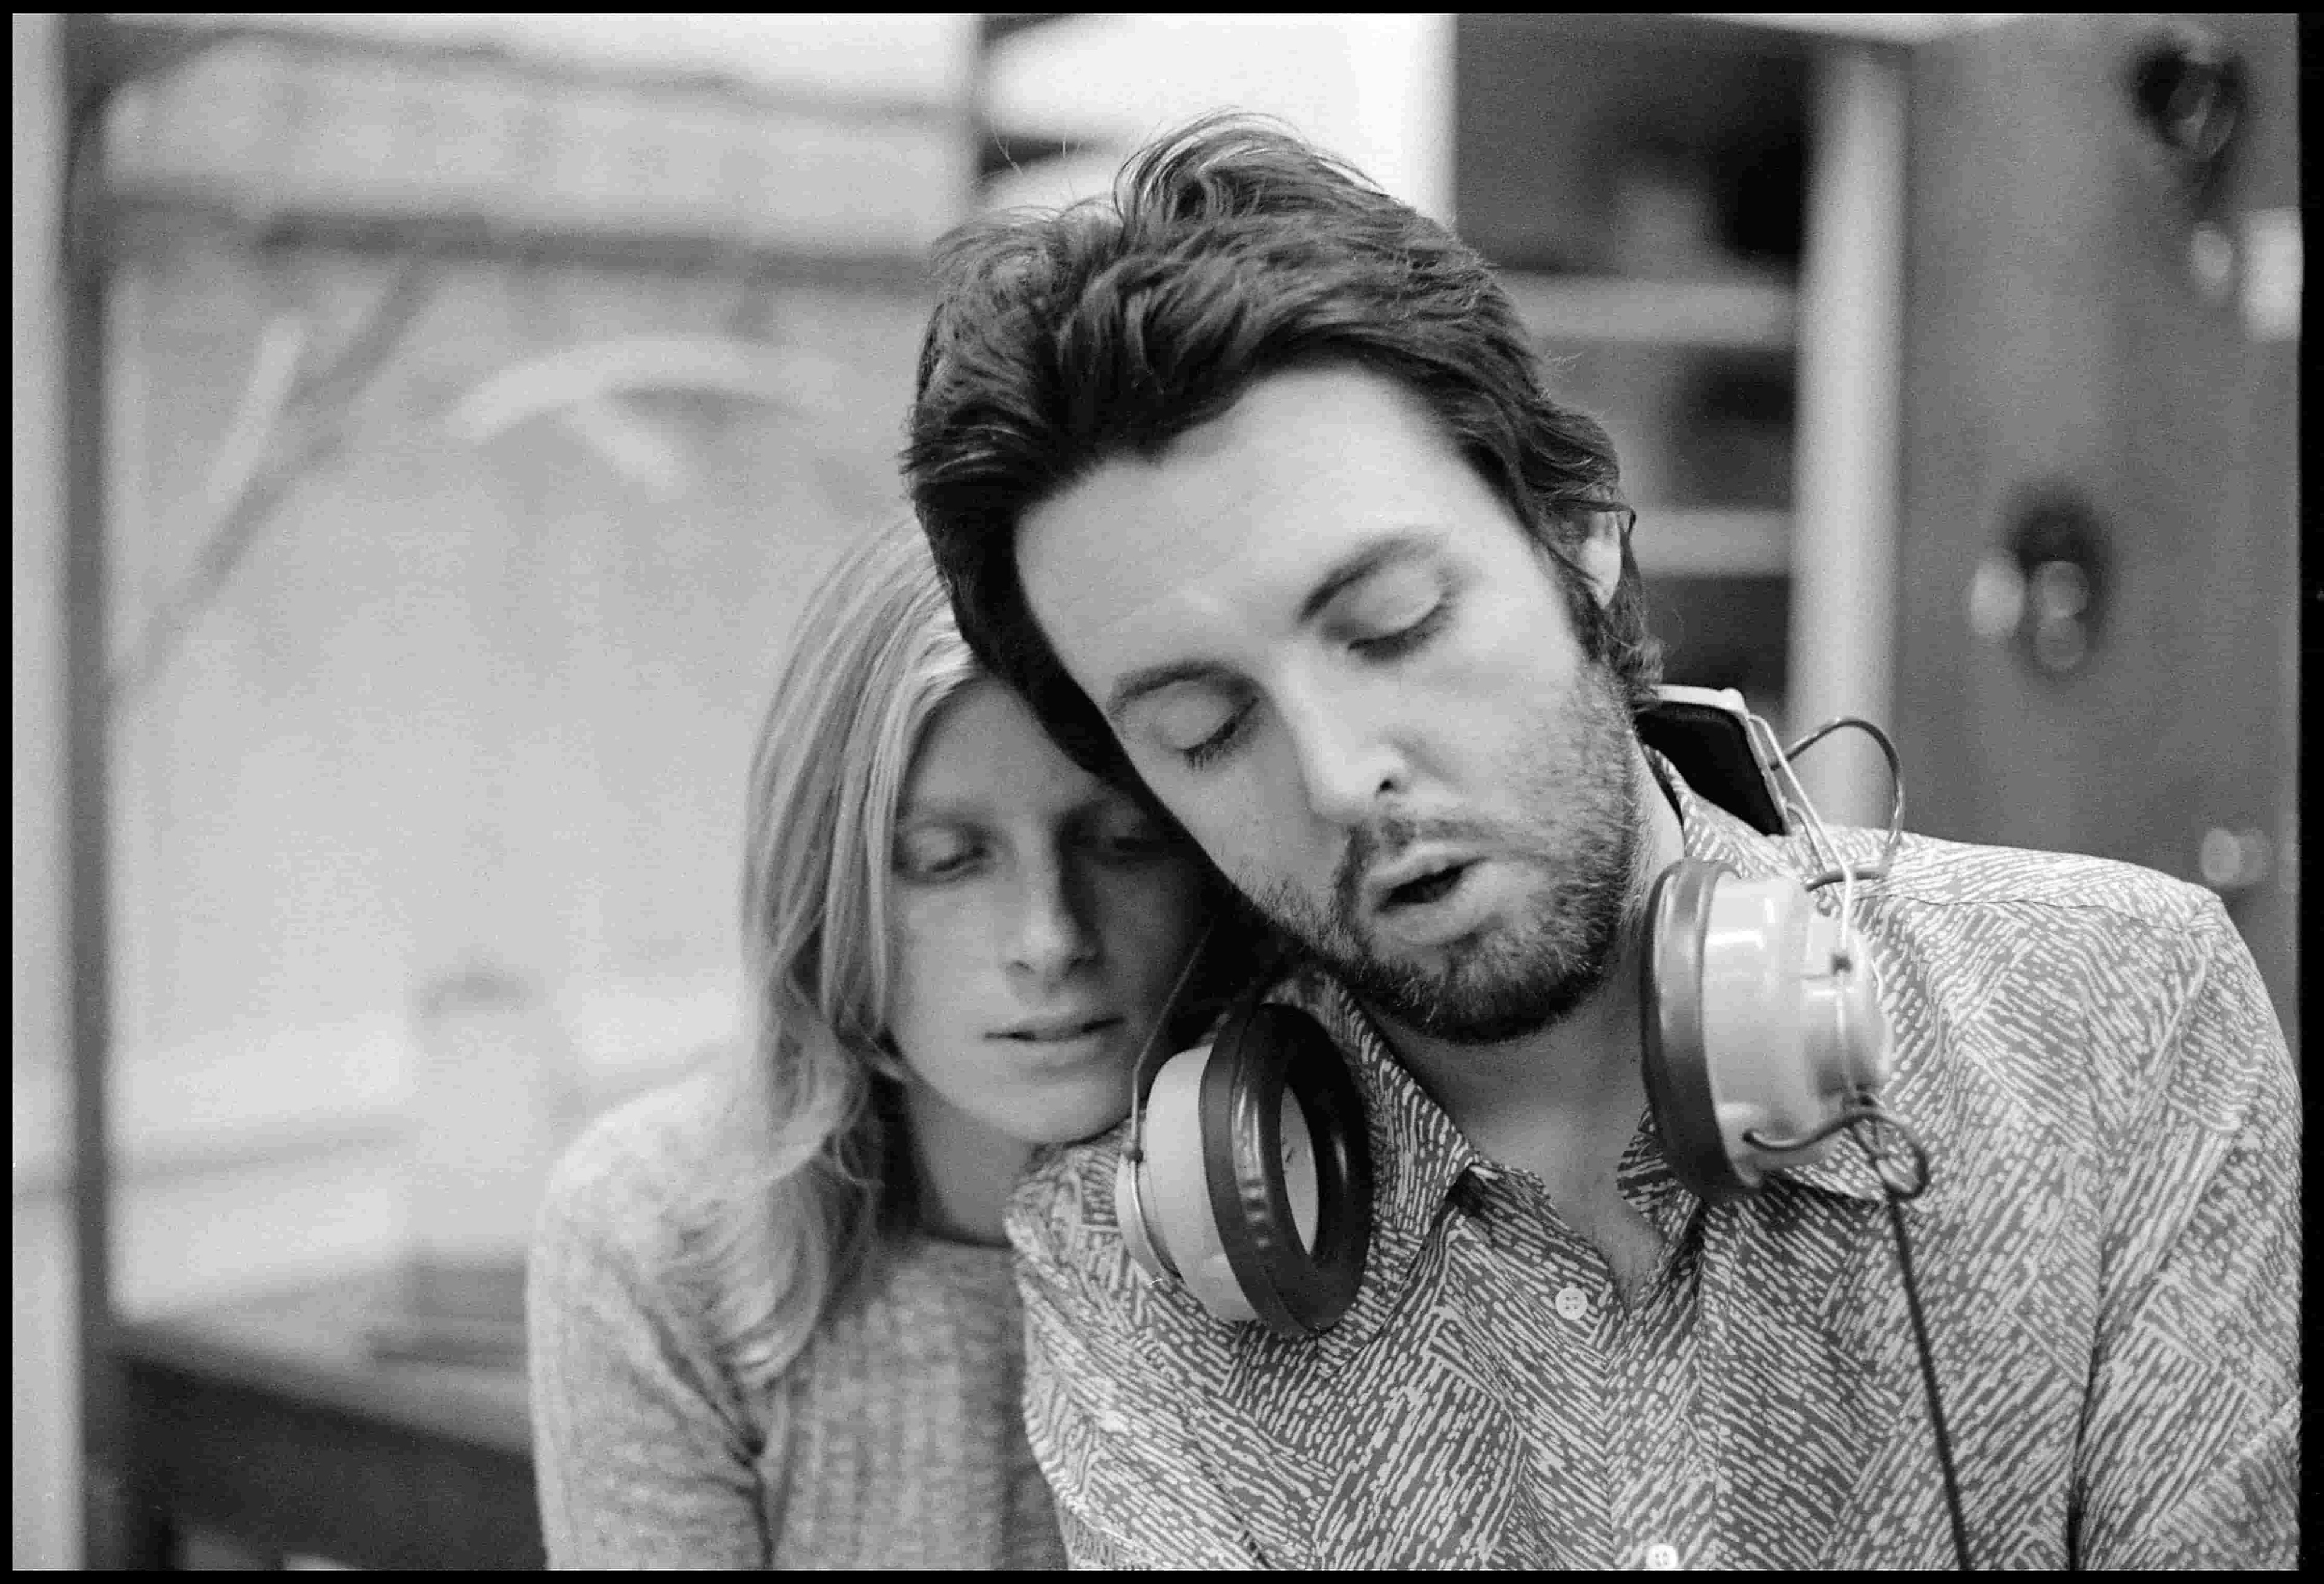 Linda and Paul McCartney leaning on each other and recording music